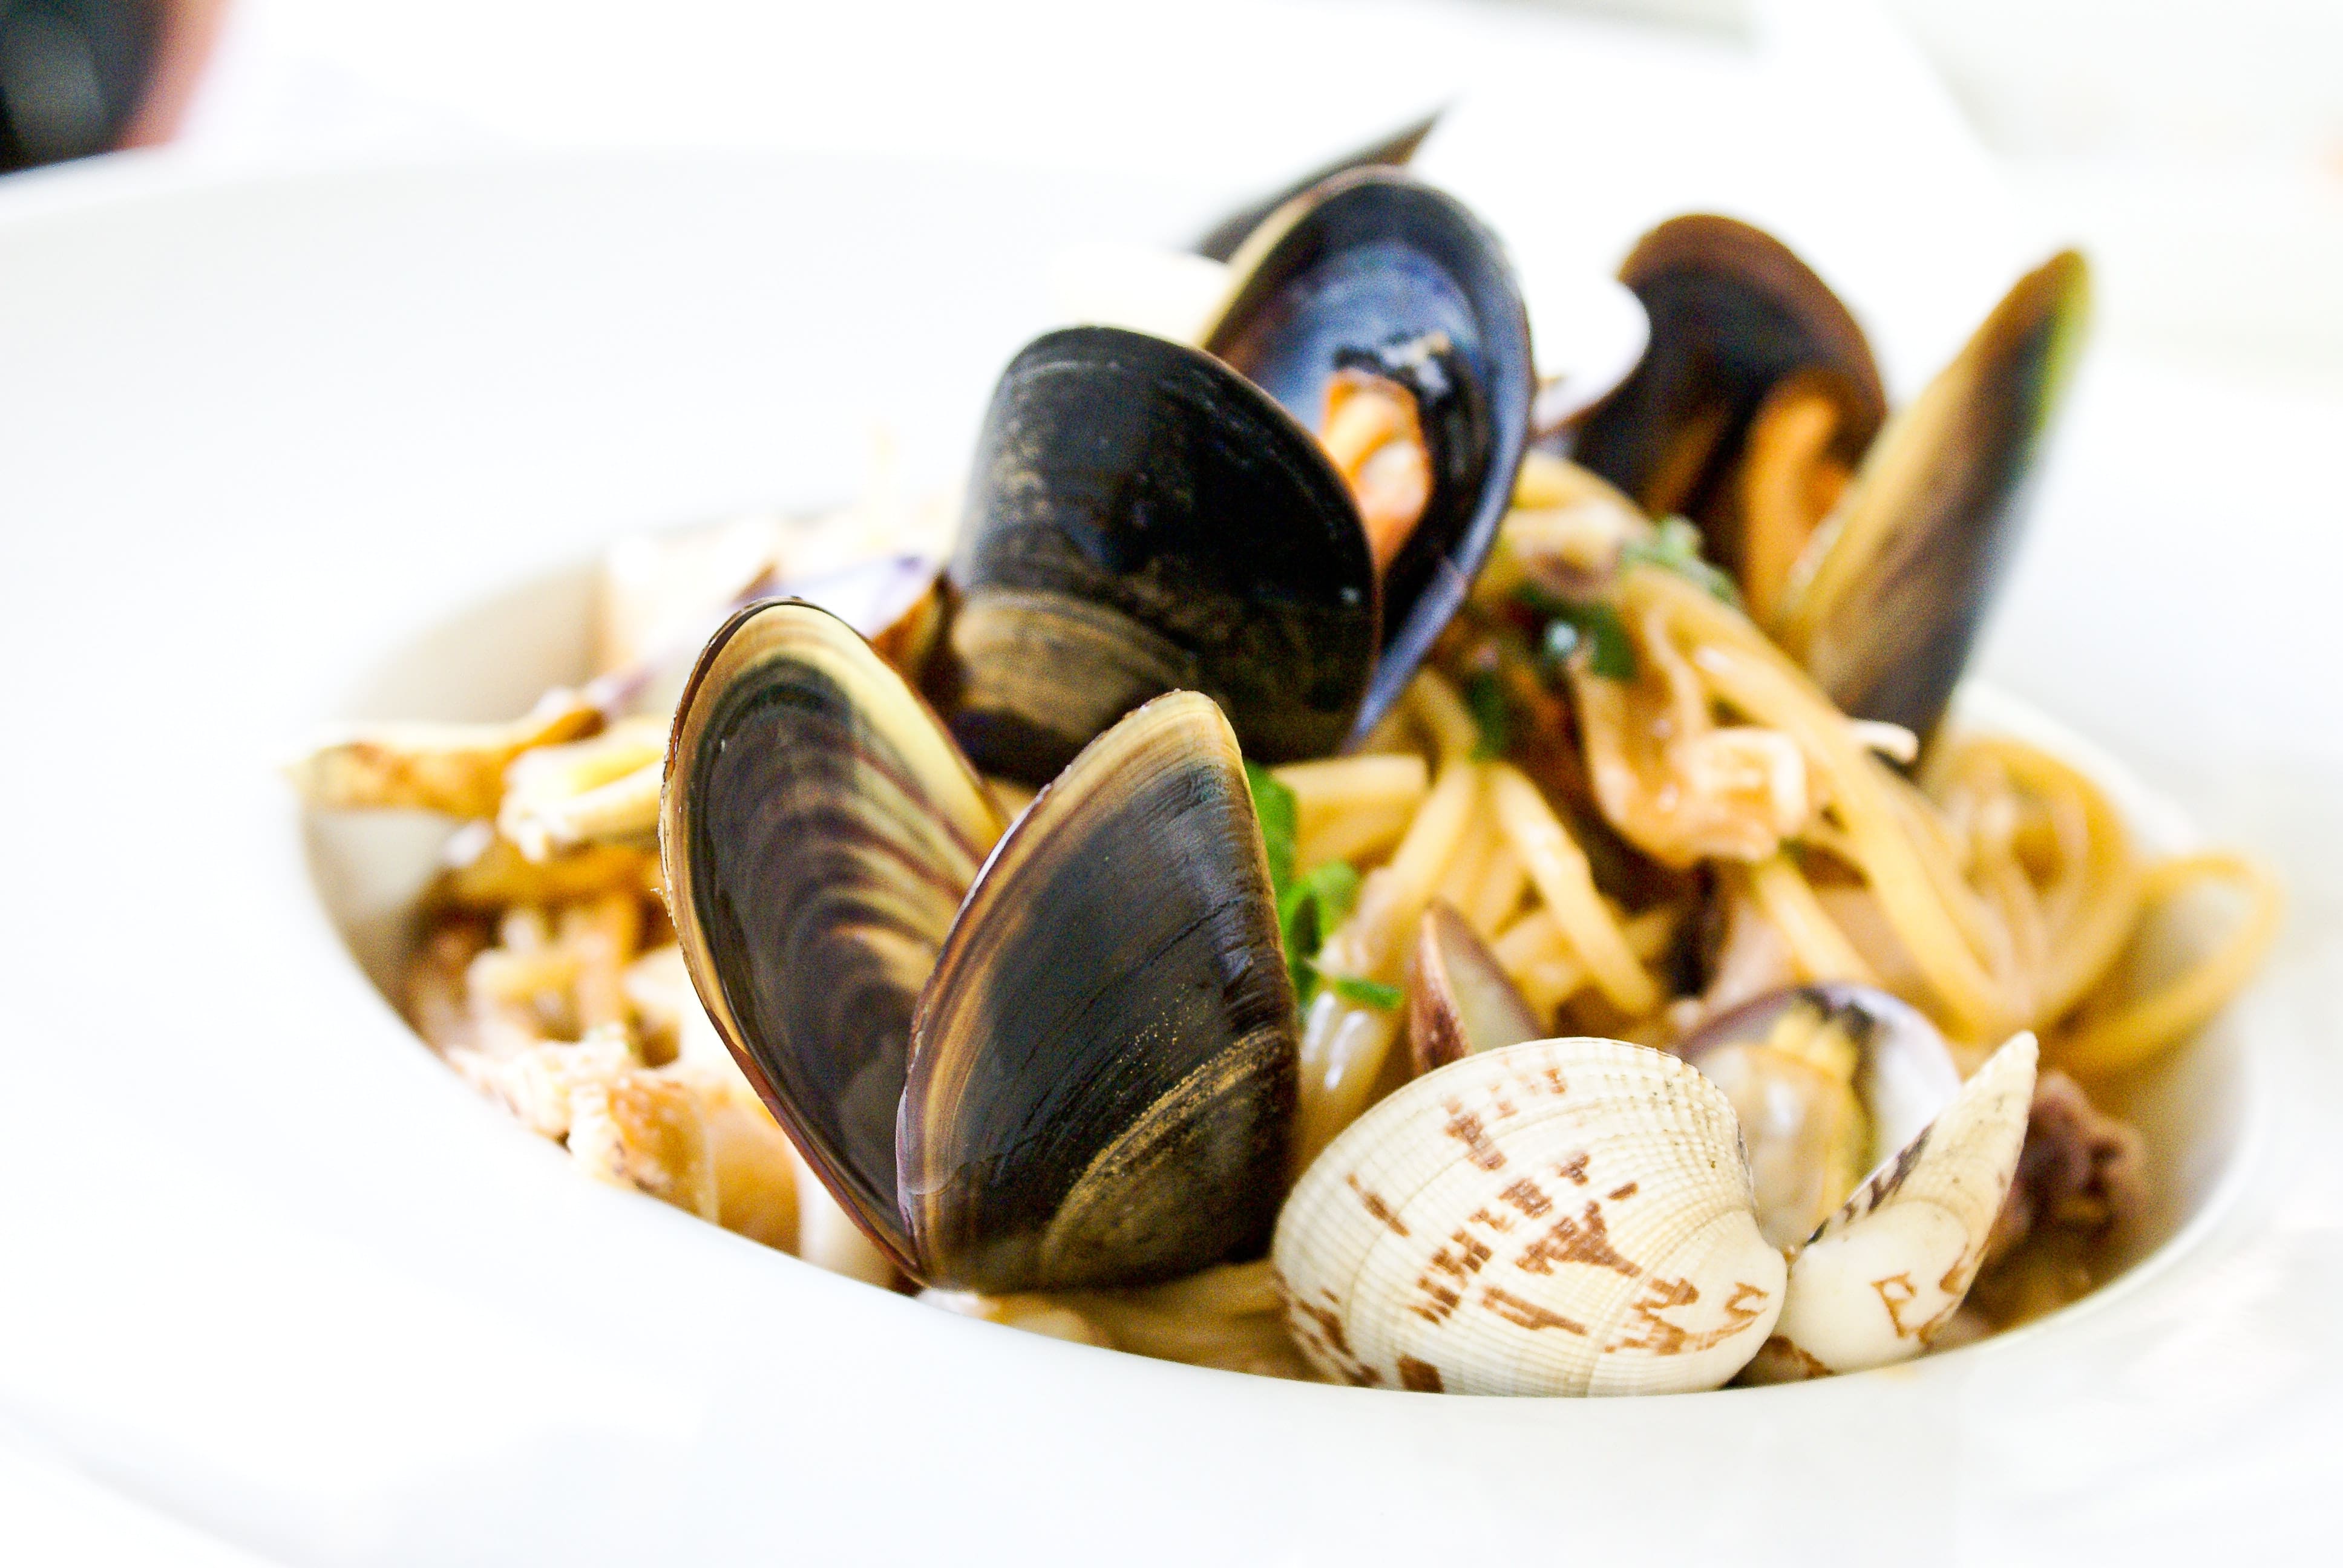 Seafood, Mussel, Dinner, Lunch, Local, Locally grown, world famous, must try, whidbey island